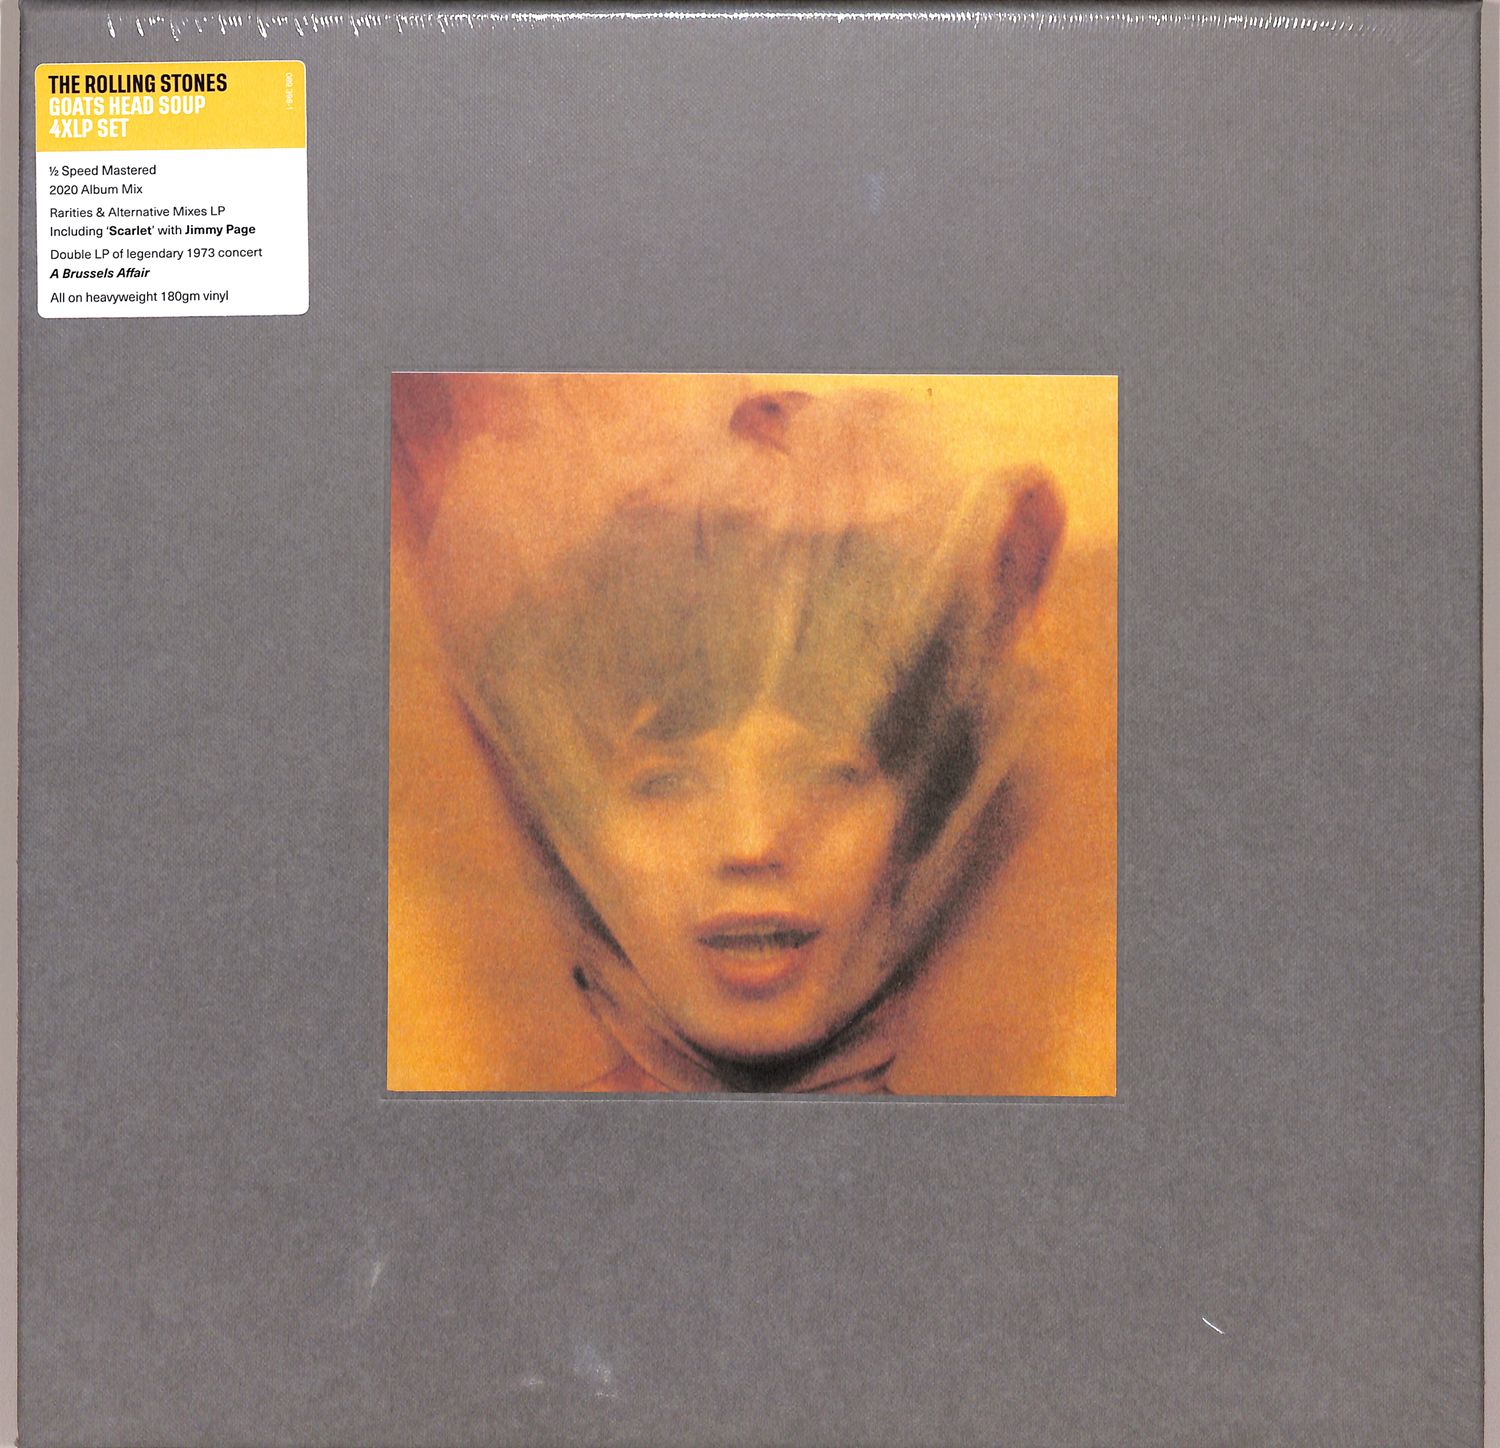 The Rolling Stones - GOATS HEAD SOUP 